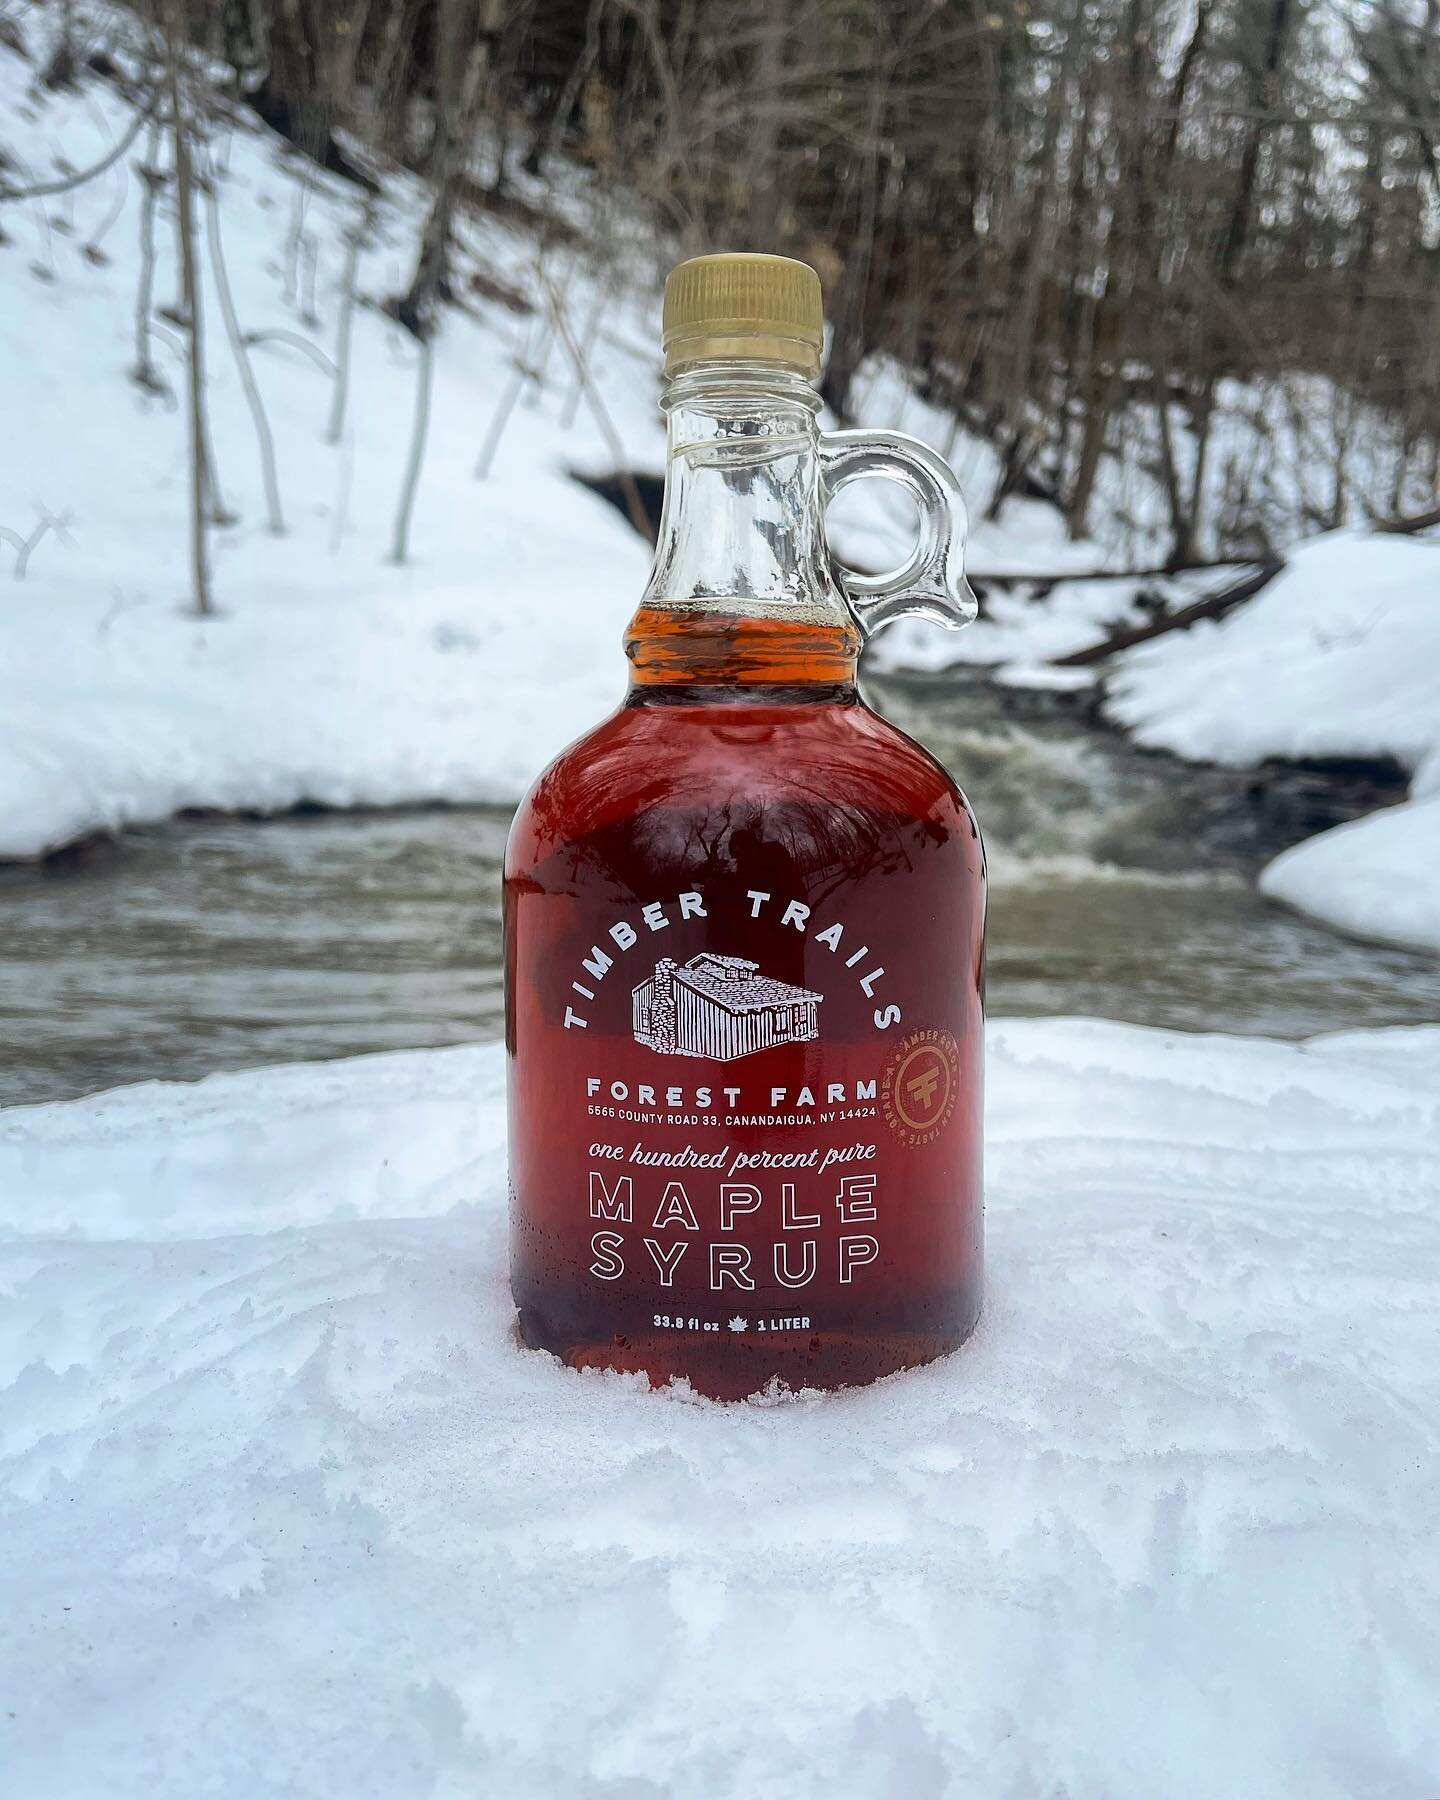 Tomorrow kicks off the first day of NYS Maple Weekend! We will be open Saturday and Sunday from 10am-4pm. We will be open next weekend too! Come visit to tour our new 4,000 sq ft Eco-Maple lodge and taste some of our 2023 syrup! 🍁